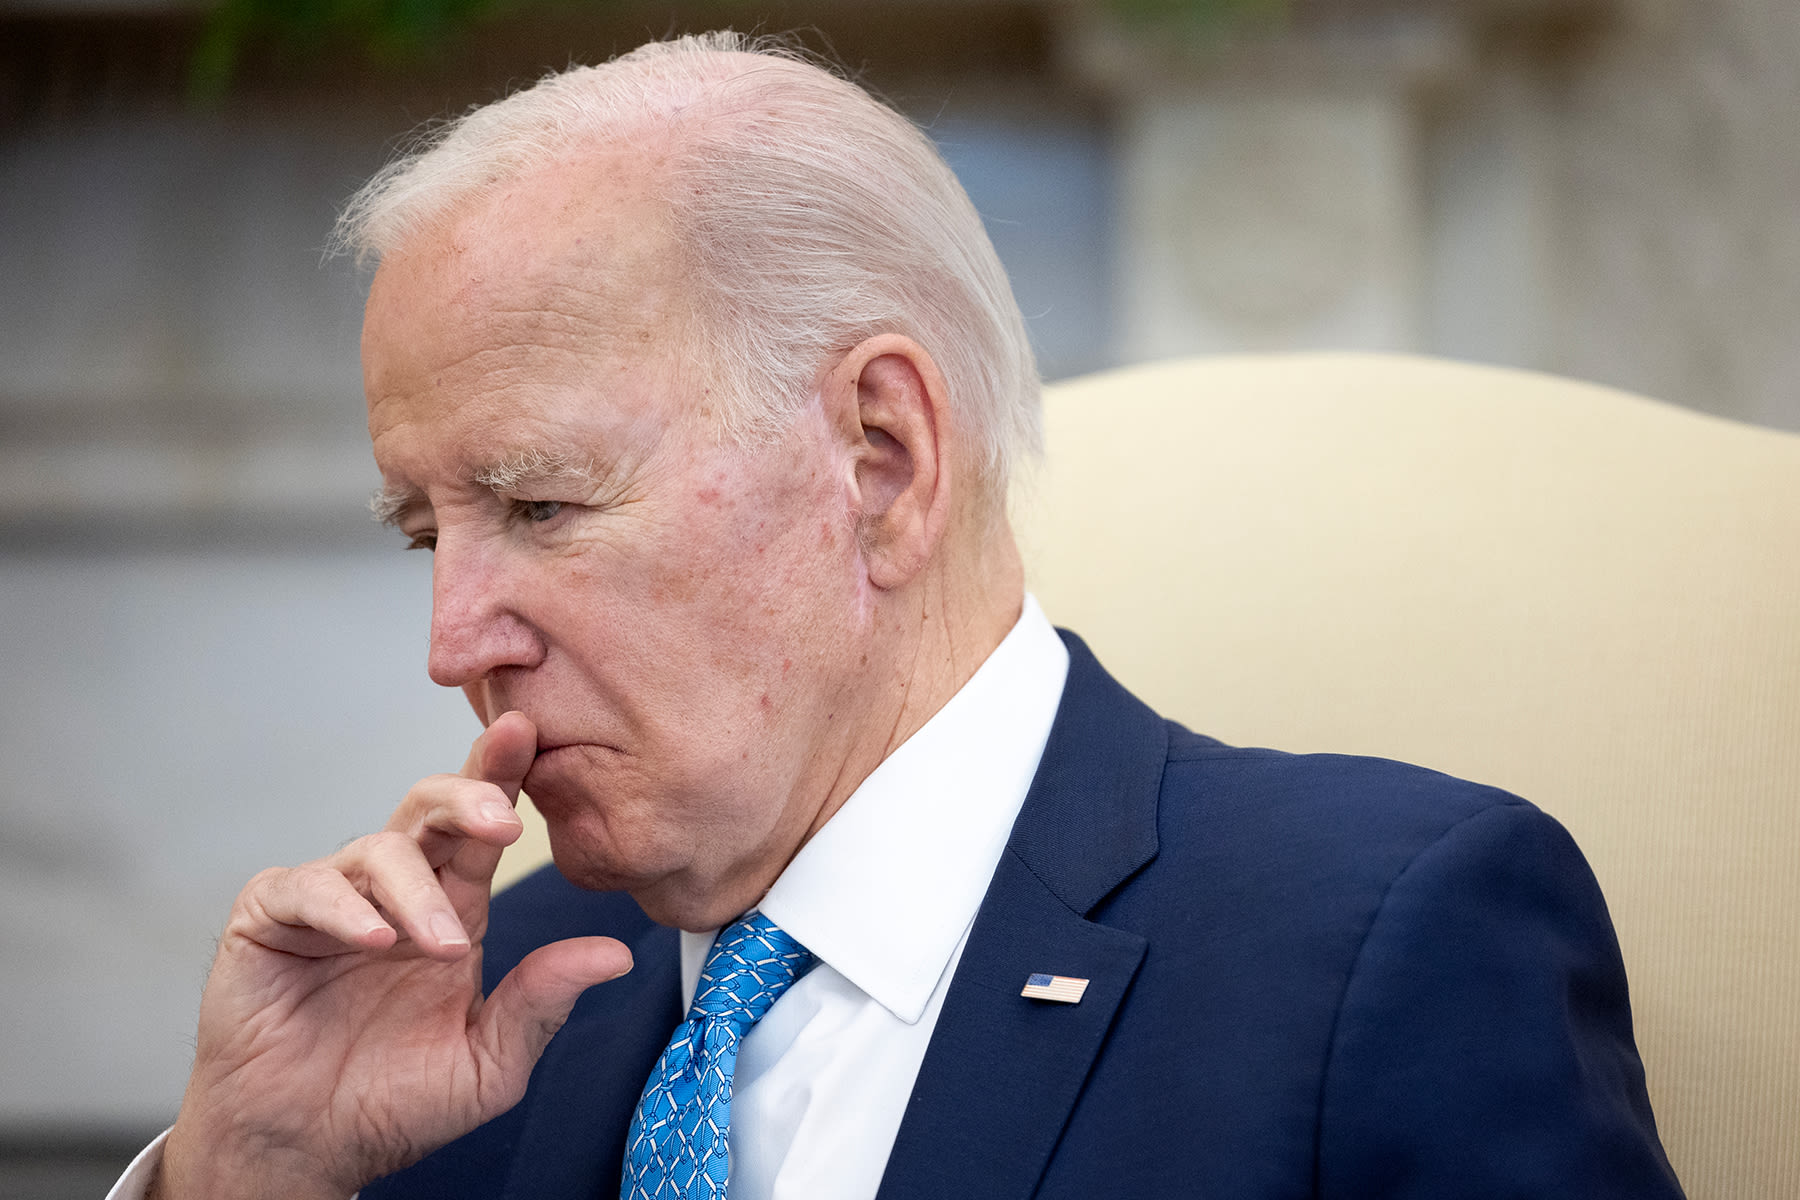 Biden Should Resign the Presidency to Save His Legacy